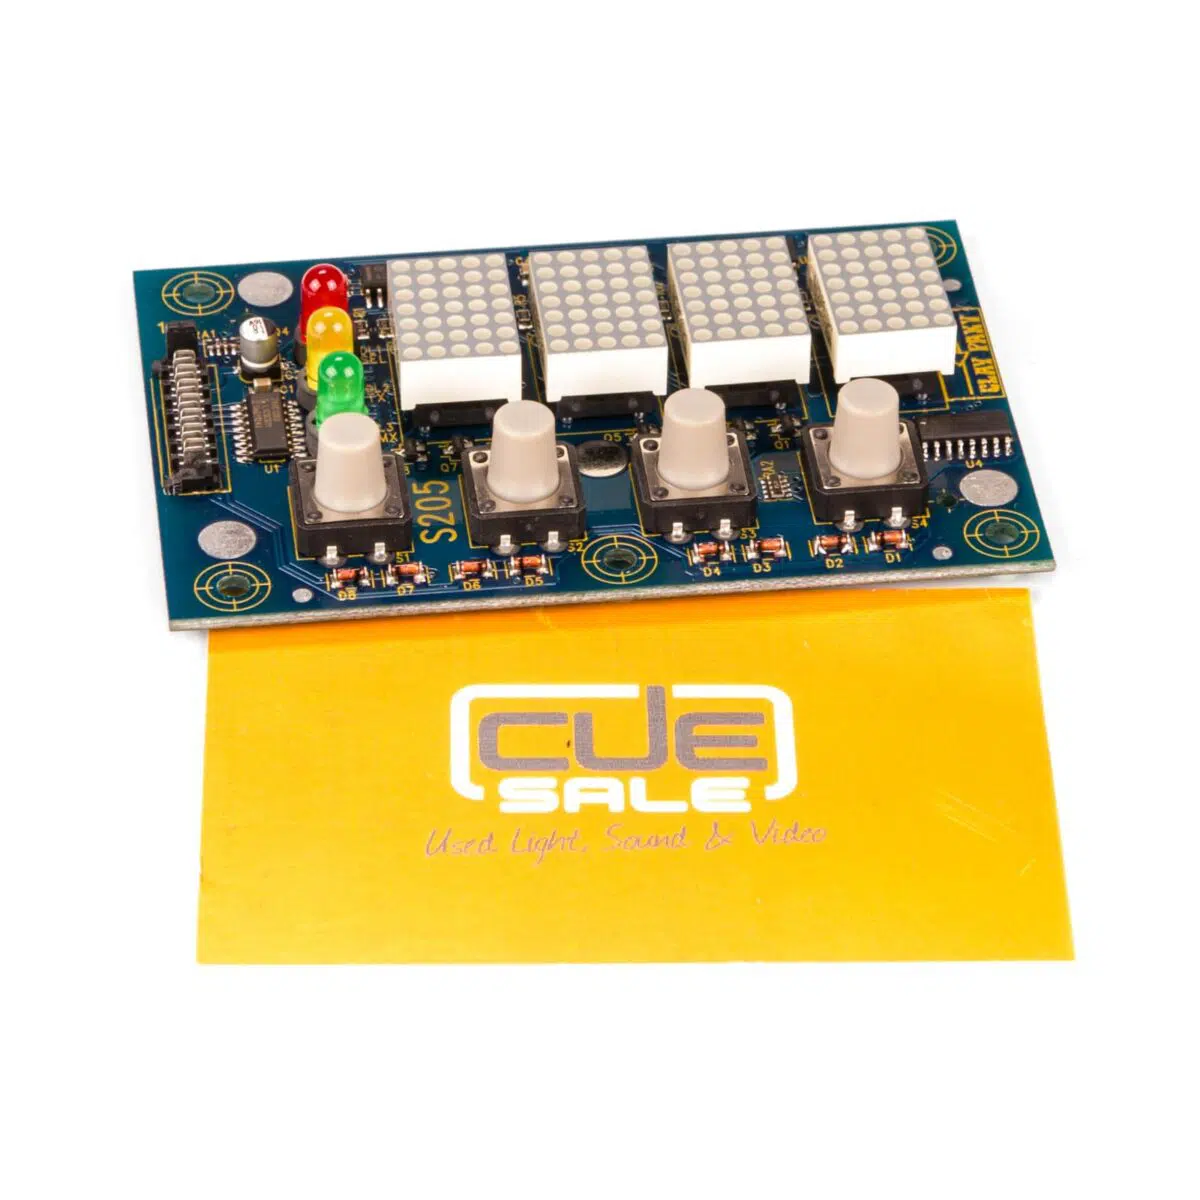 Clay Paky 4-digits display board, S205 for Alpha 1200 series